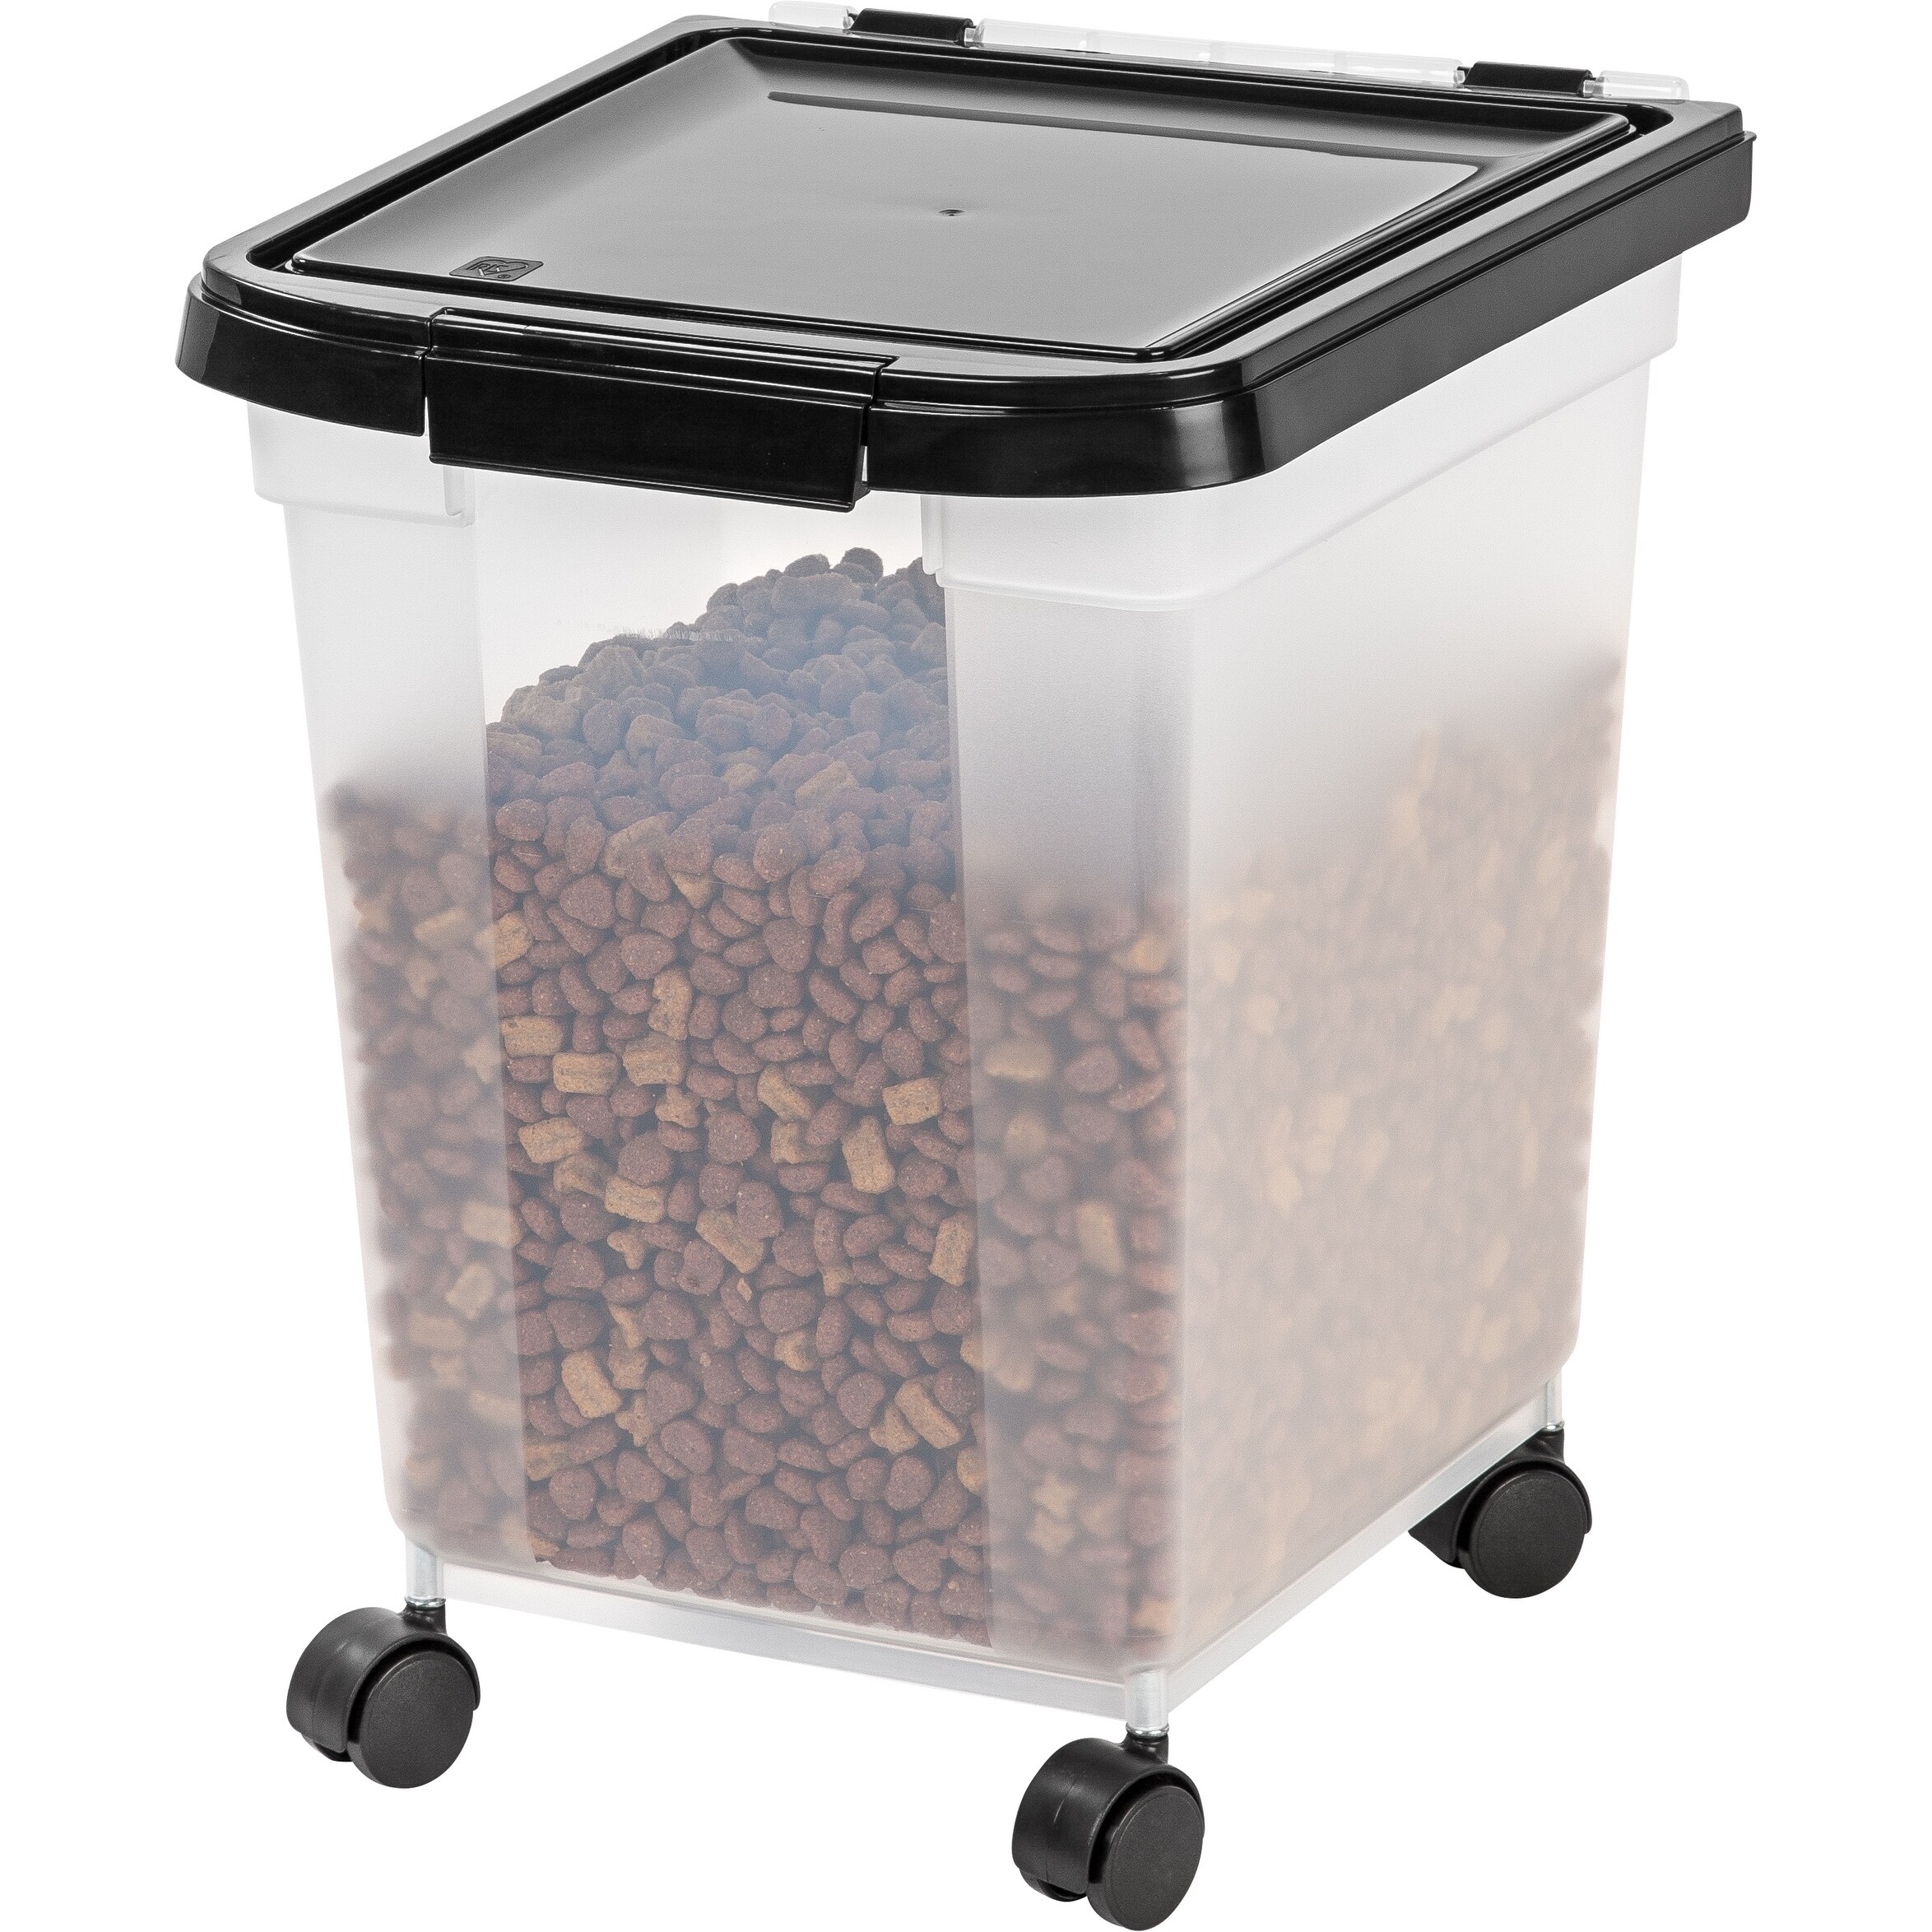 25 lb pet food container